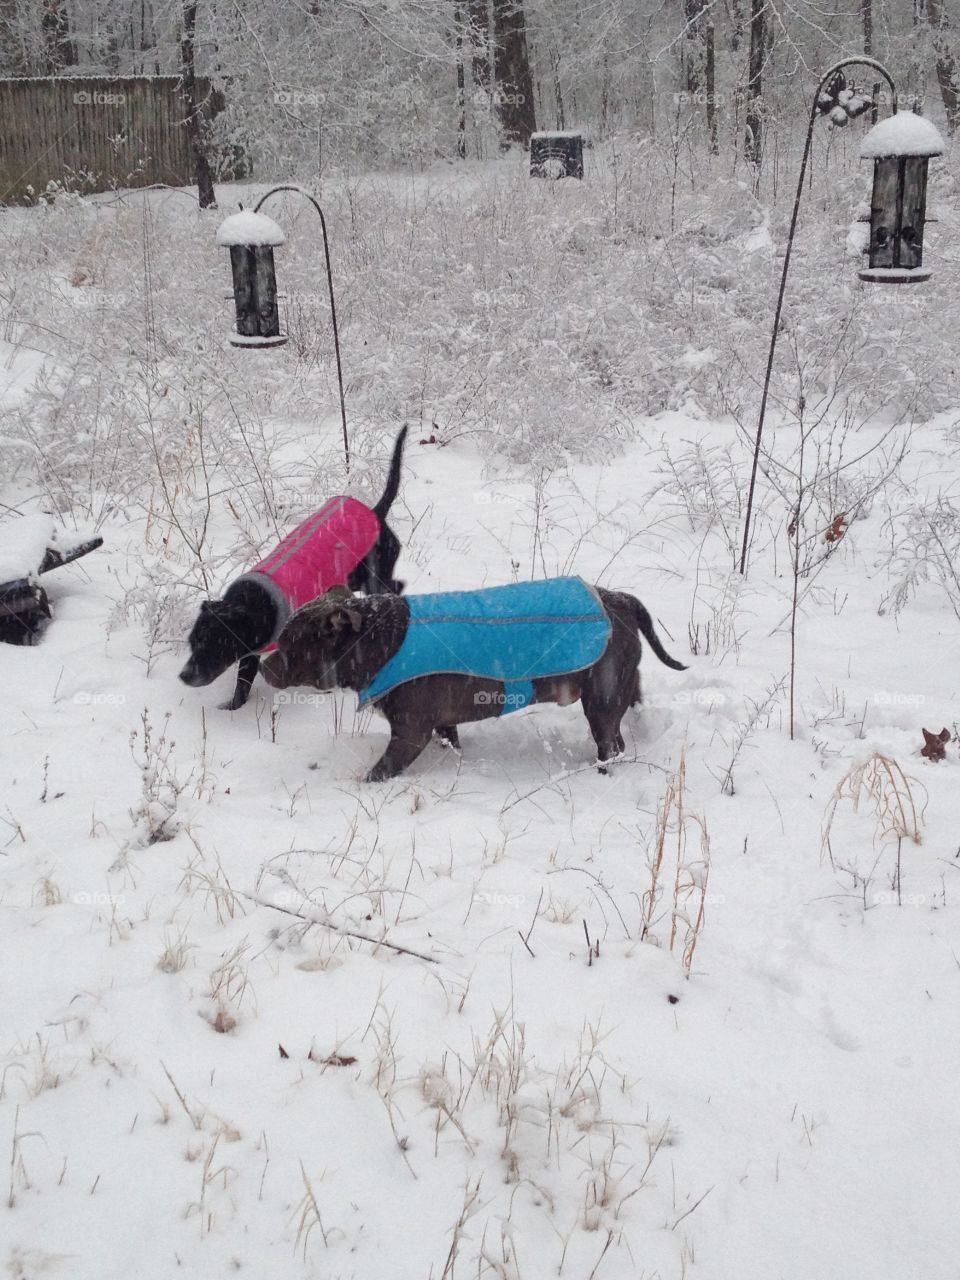 Pitbulls playing in the snow, wearing their parkas.